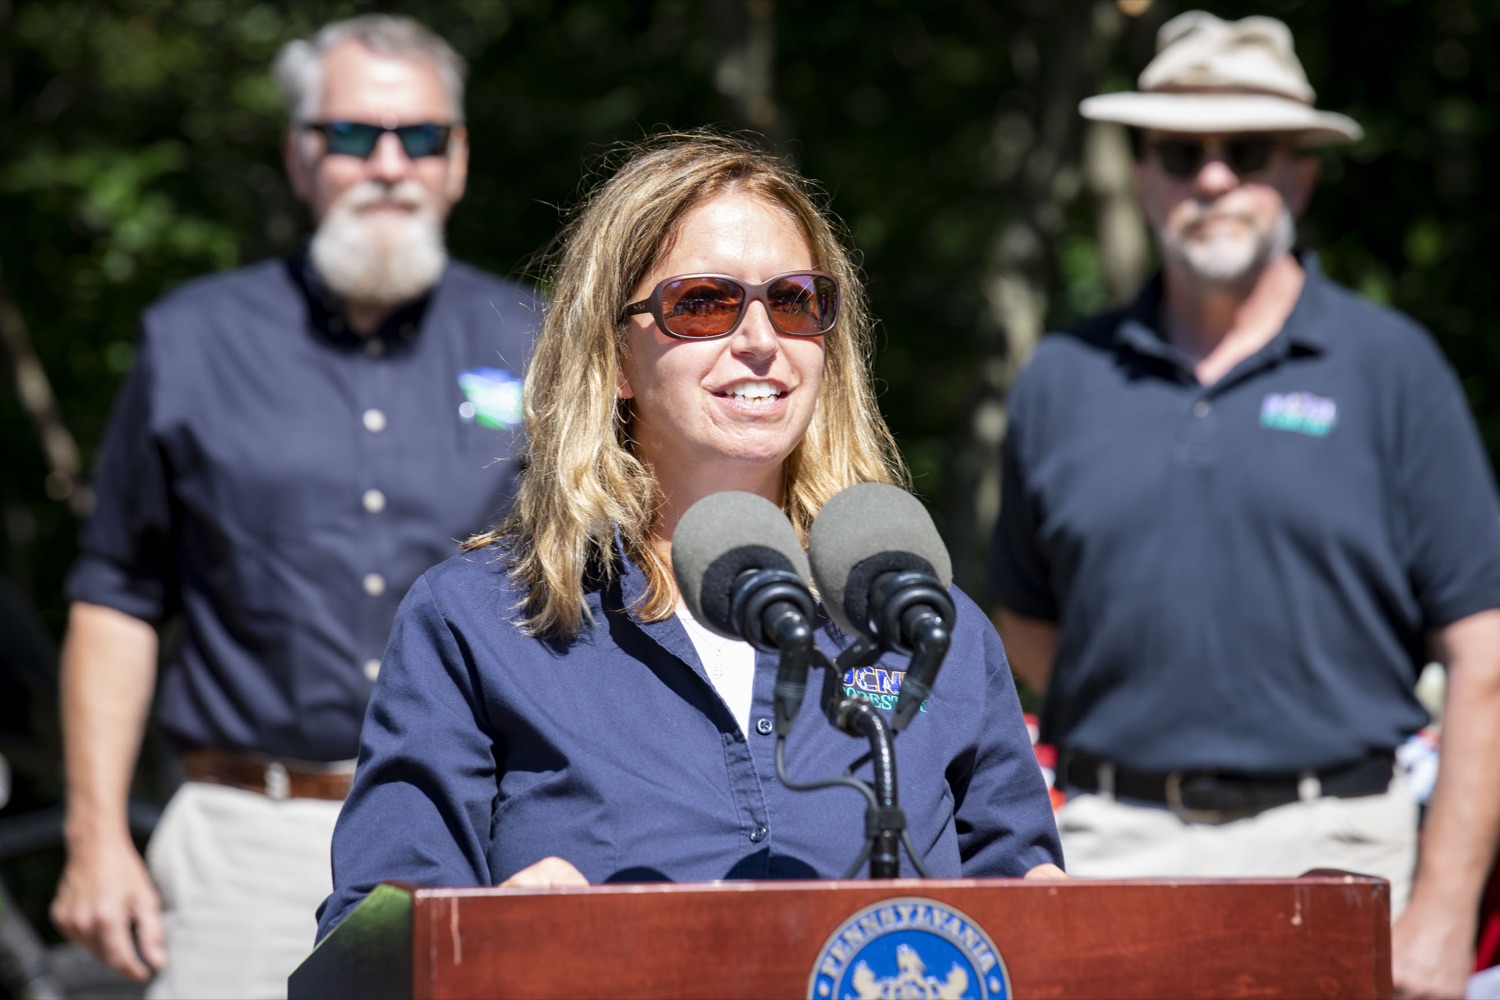 State Forester Ellen Shultzabarger discusses the acquisition of a 5,600-acre tract of land that will be developed into a new motorized recreation area, in McAdoo, PA on August 12, 2022.<br><a href="https://filesource.amperwave.net/commonwealthofpa/photo/22090_dcnr_RecreationArea_13.jpg" target="_blank">⇣ Download Photo</a>